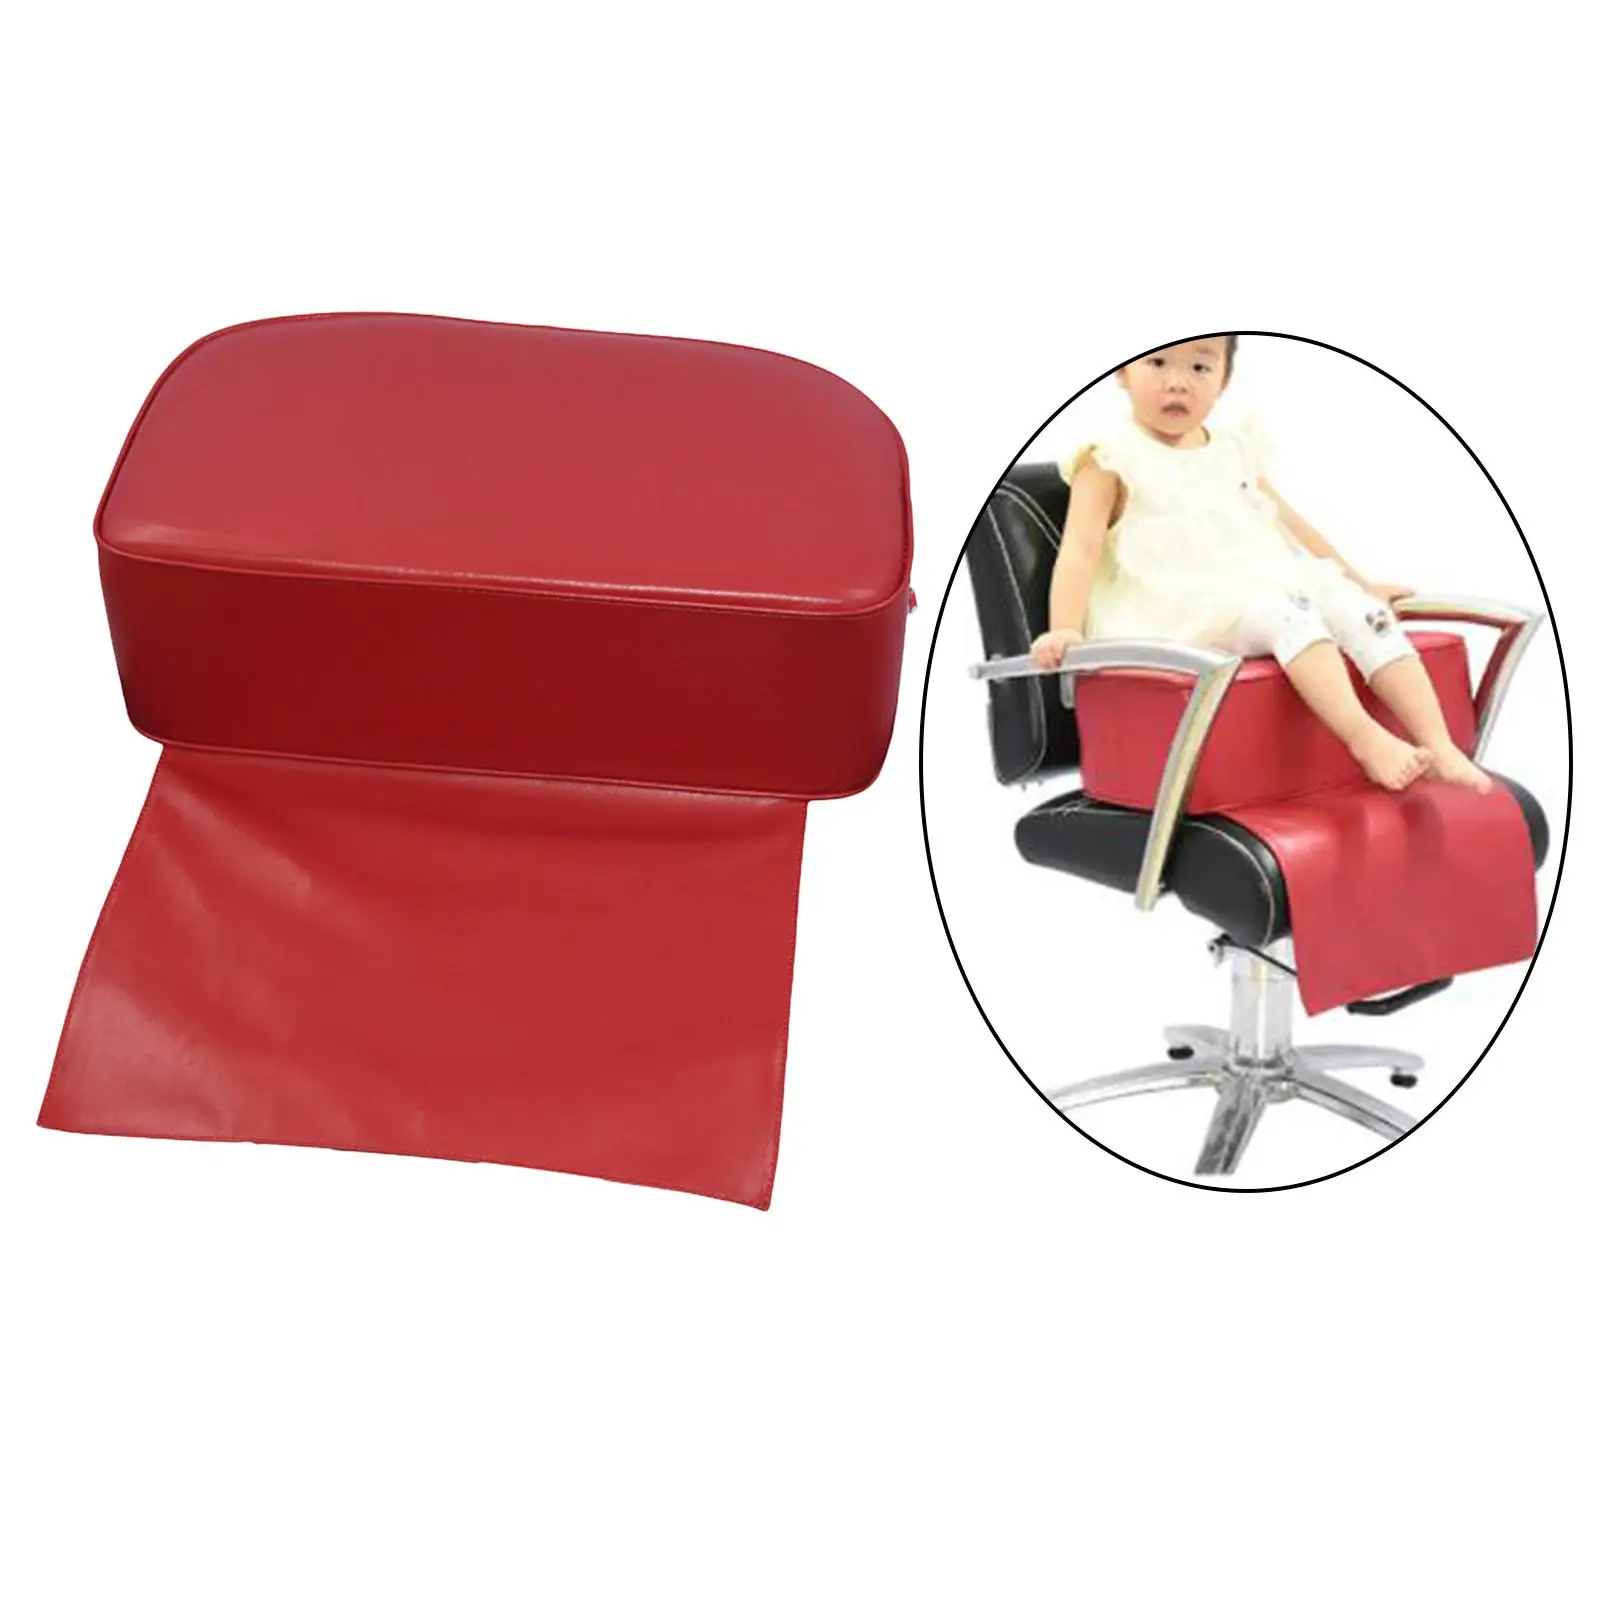 PU Barber Beauty Salon Spa Equipment Styling Chair Child Booster Seat